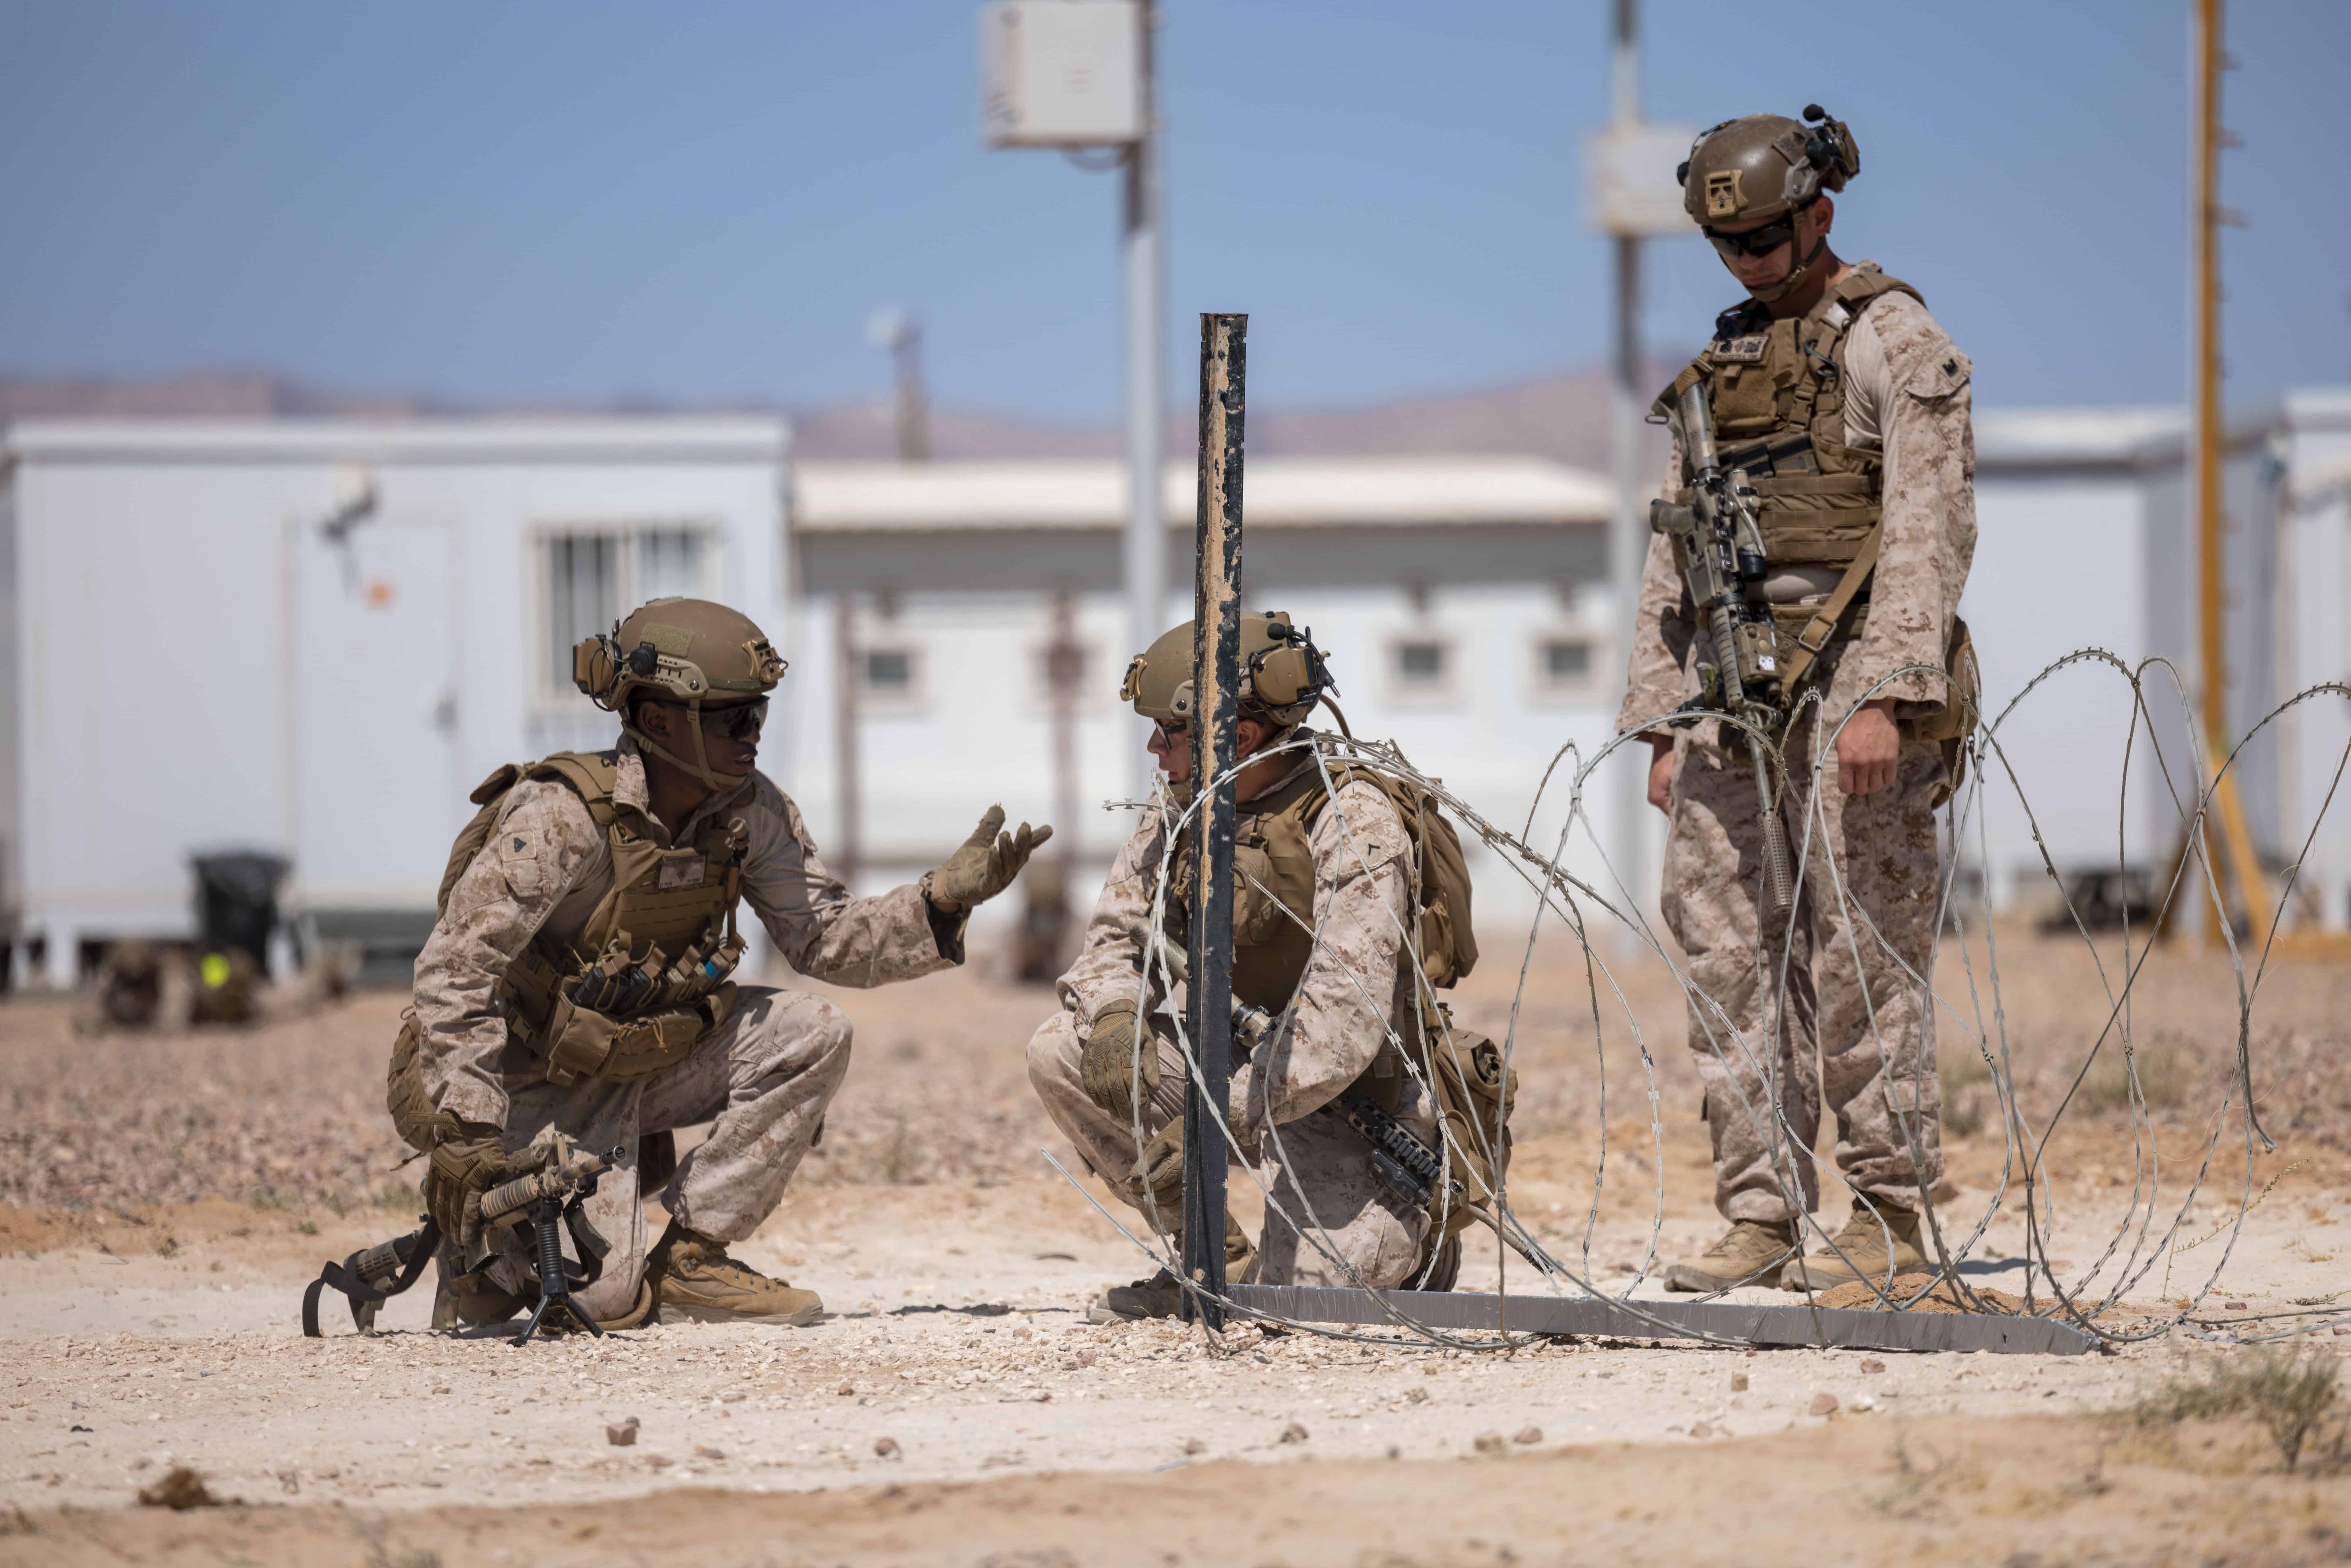 U.S. Marine Corps coordinate with each other